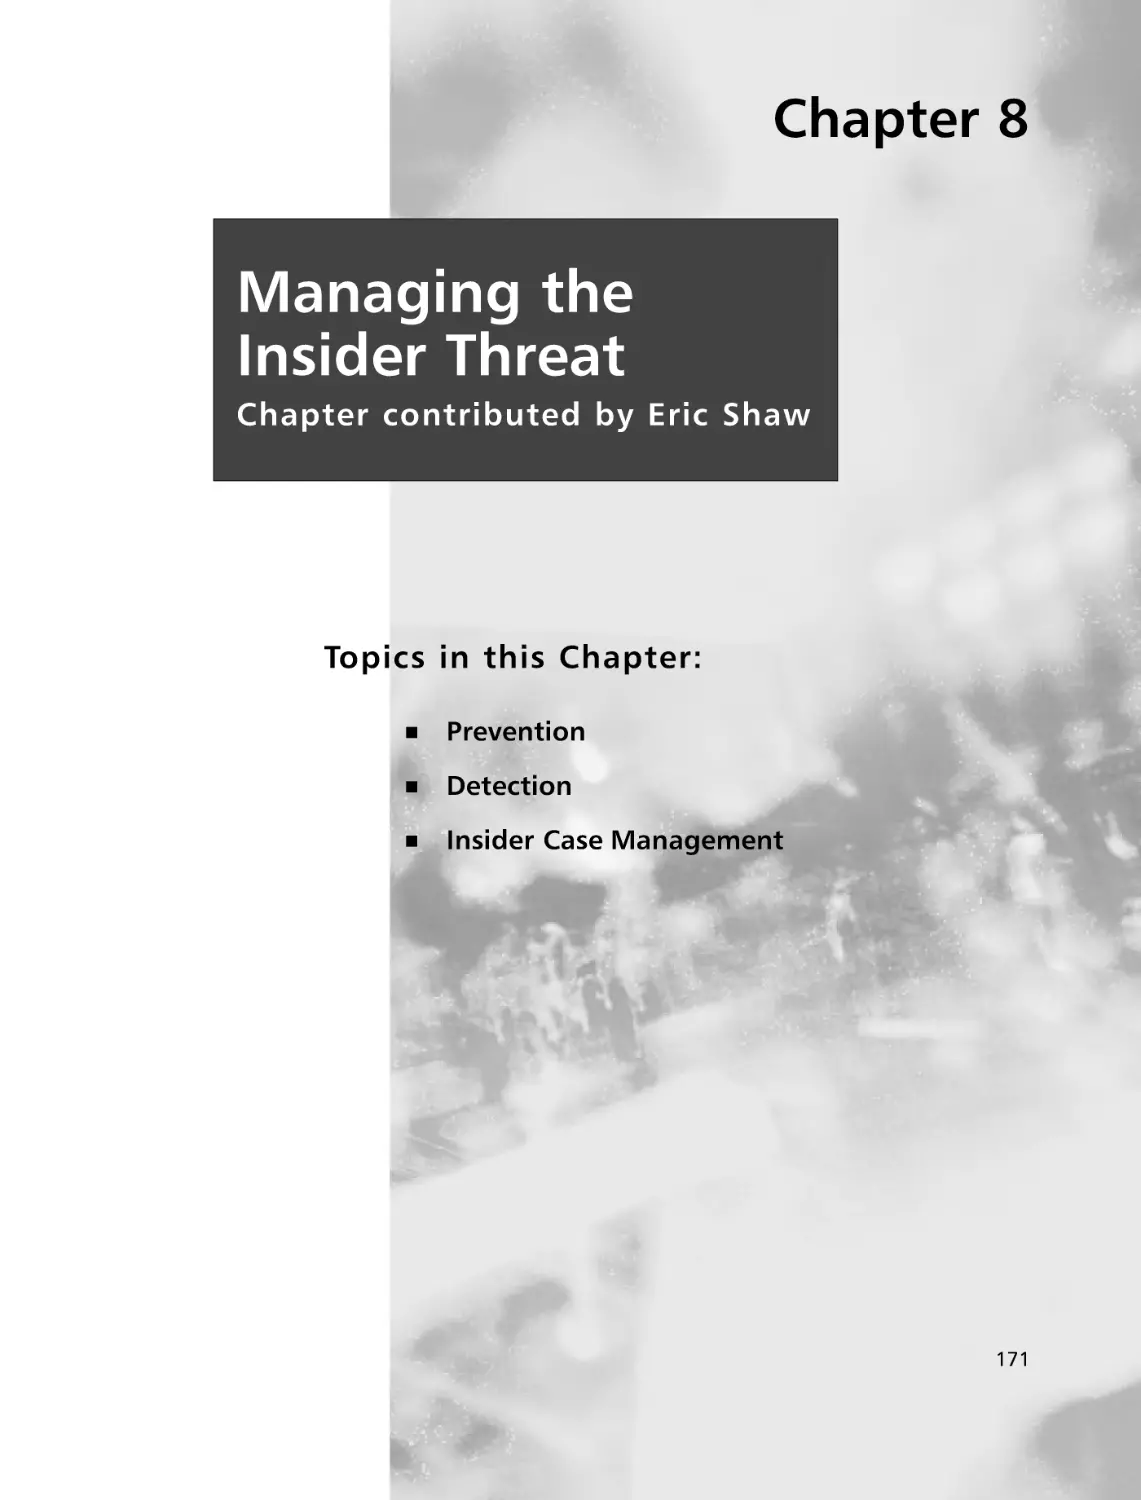 Chapter 8 Managing the Insider Threat